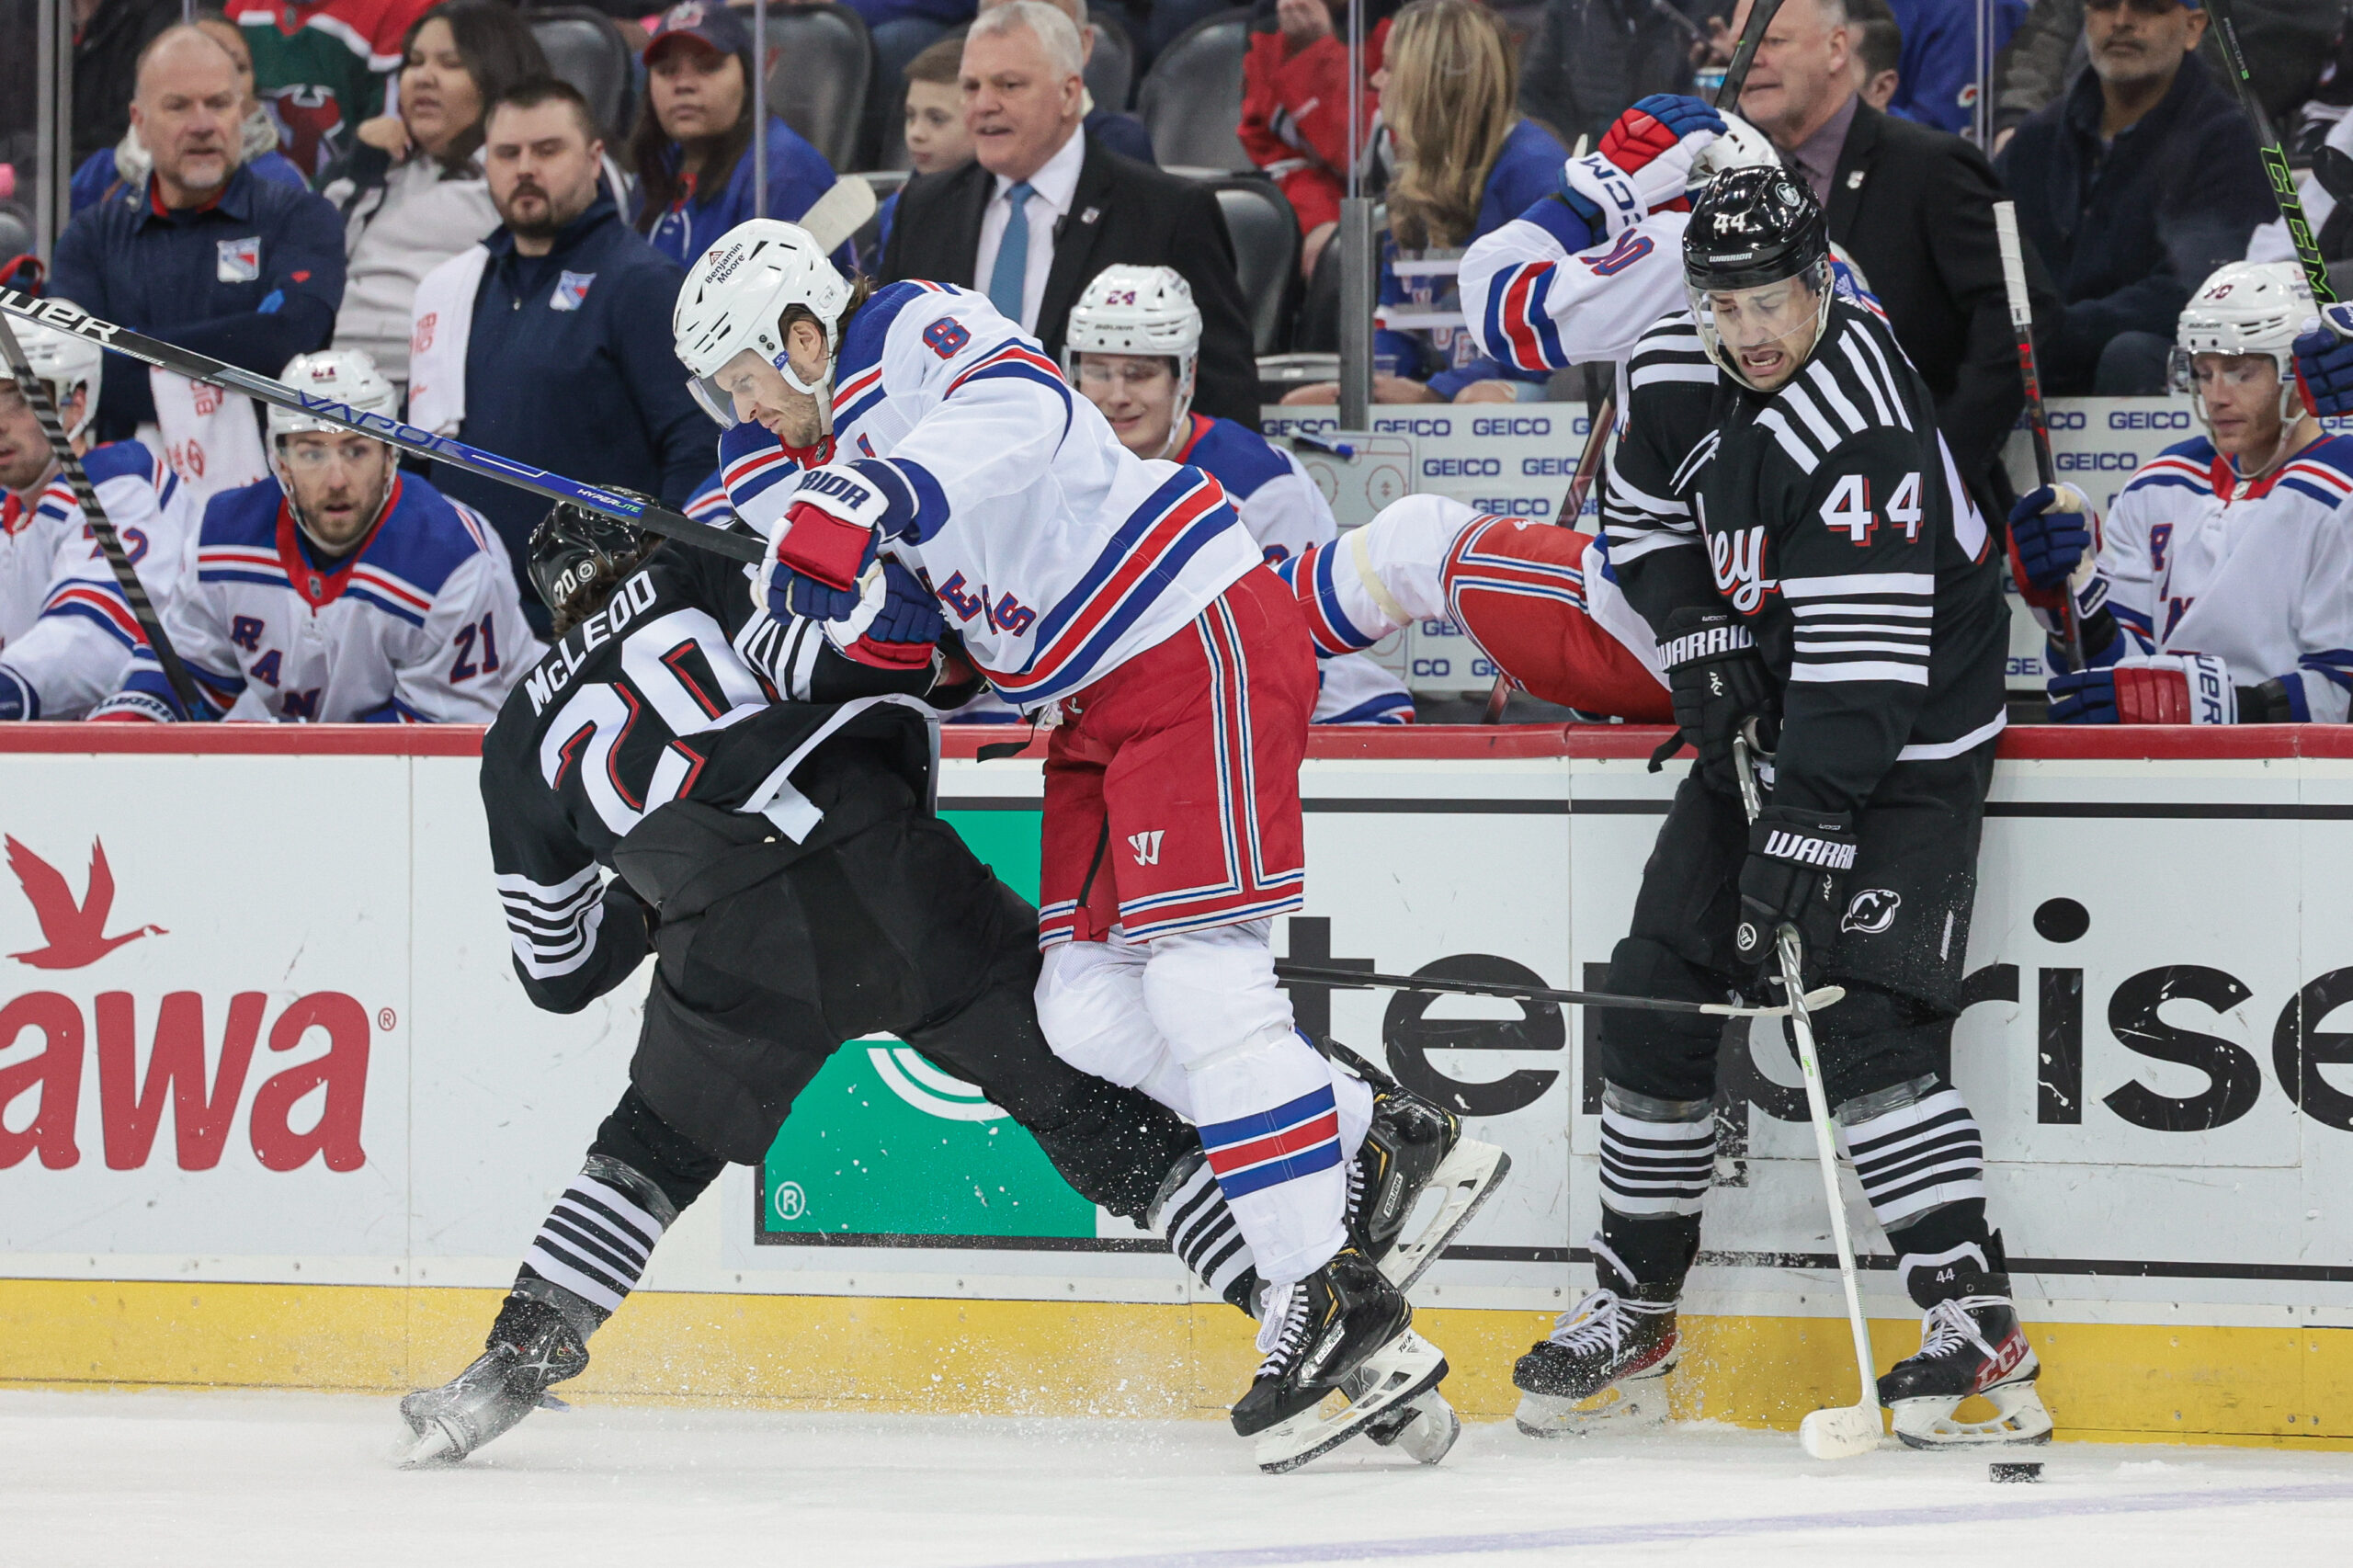 New York Rangers beat Washington Capitals in 7 to face New Jersey Devils, NHL